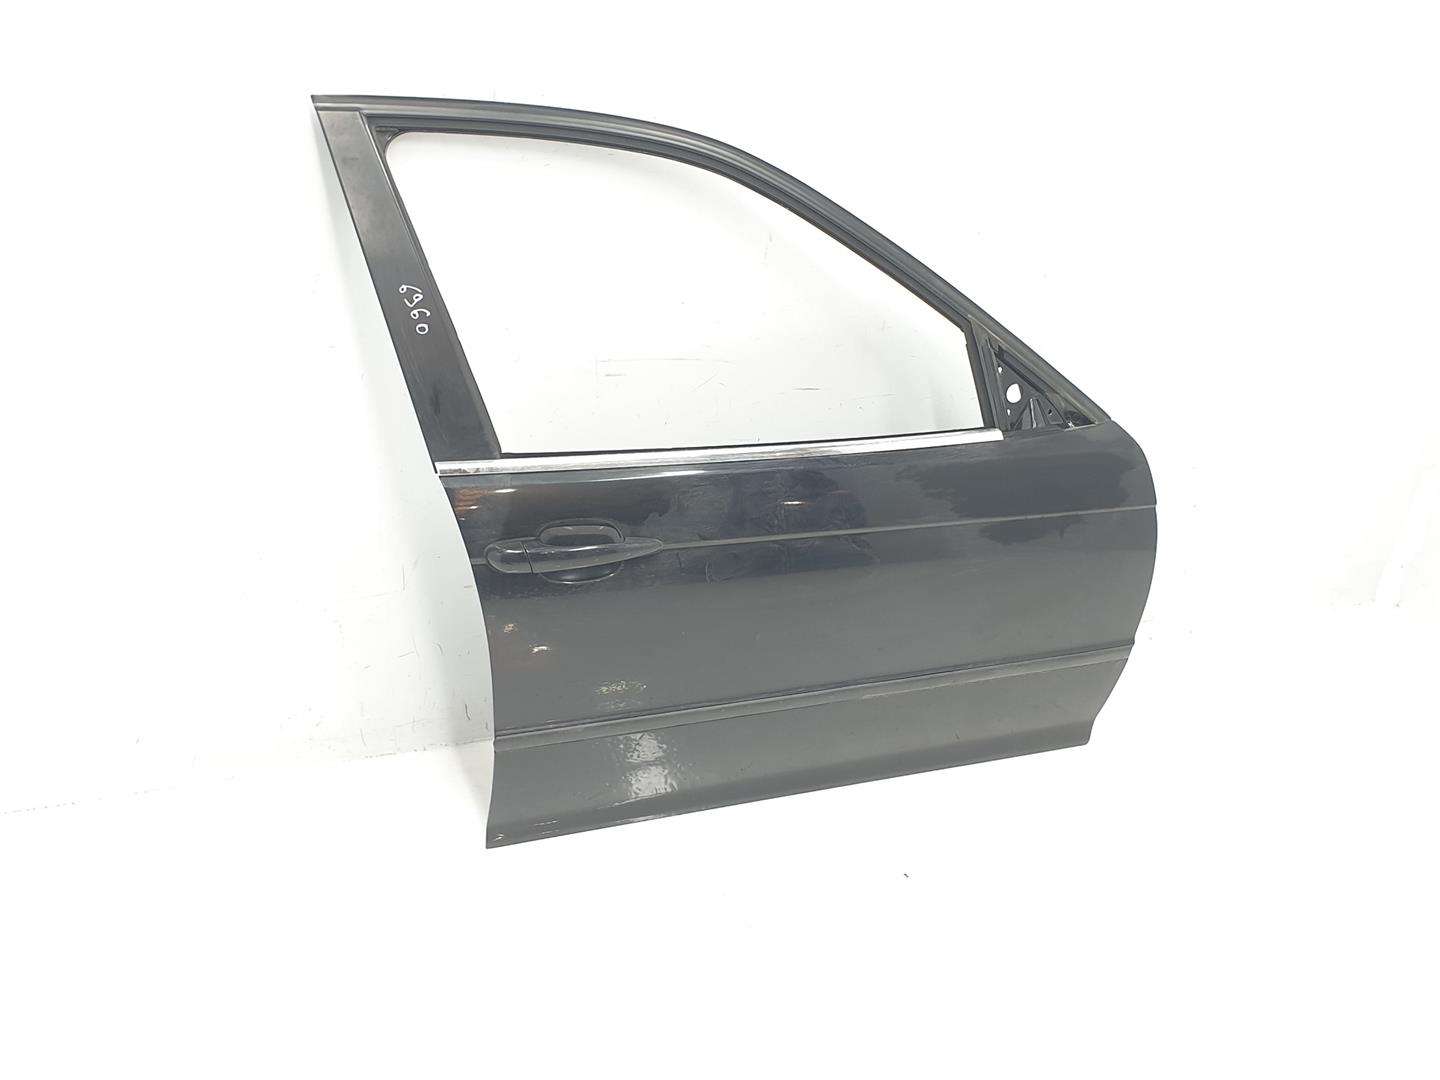 BMW 3 Series E46 (1997-2006) Front Right Door 7034152, 41517034152, COLORNEGRO(475) 24551594